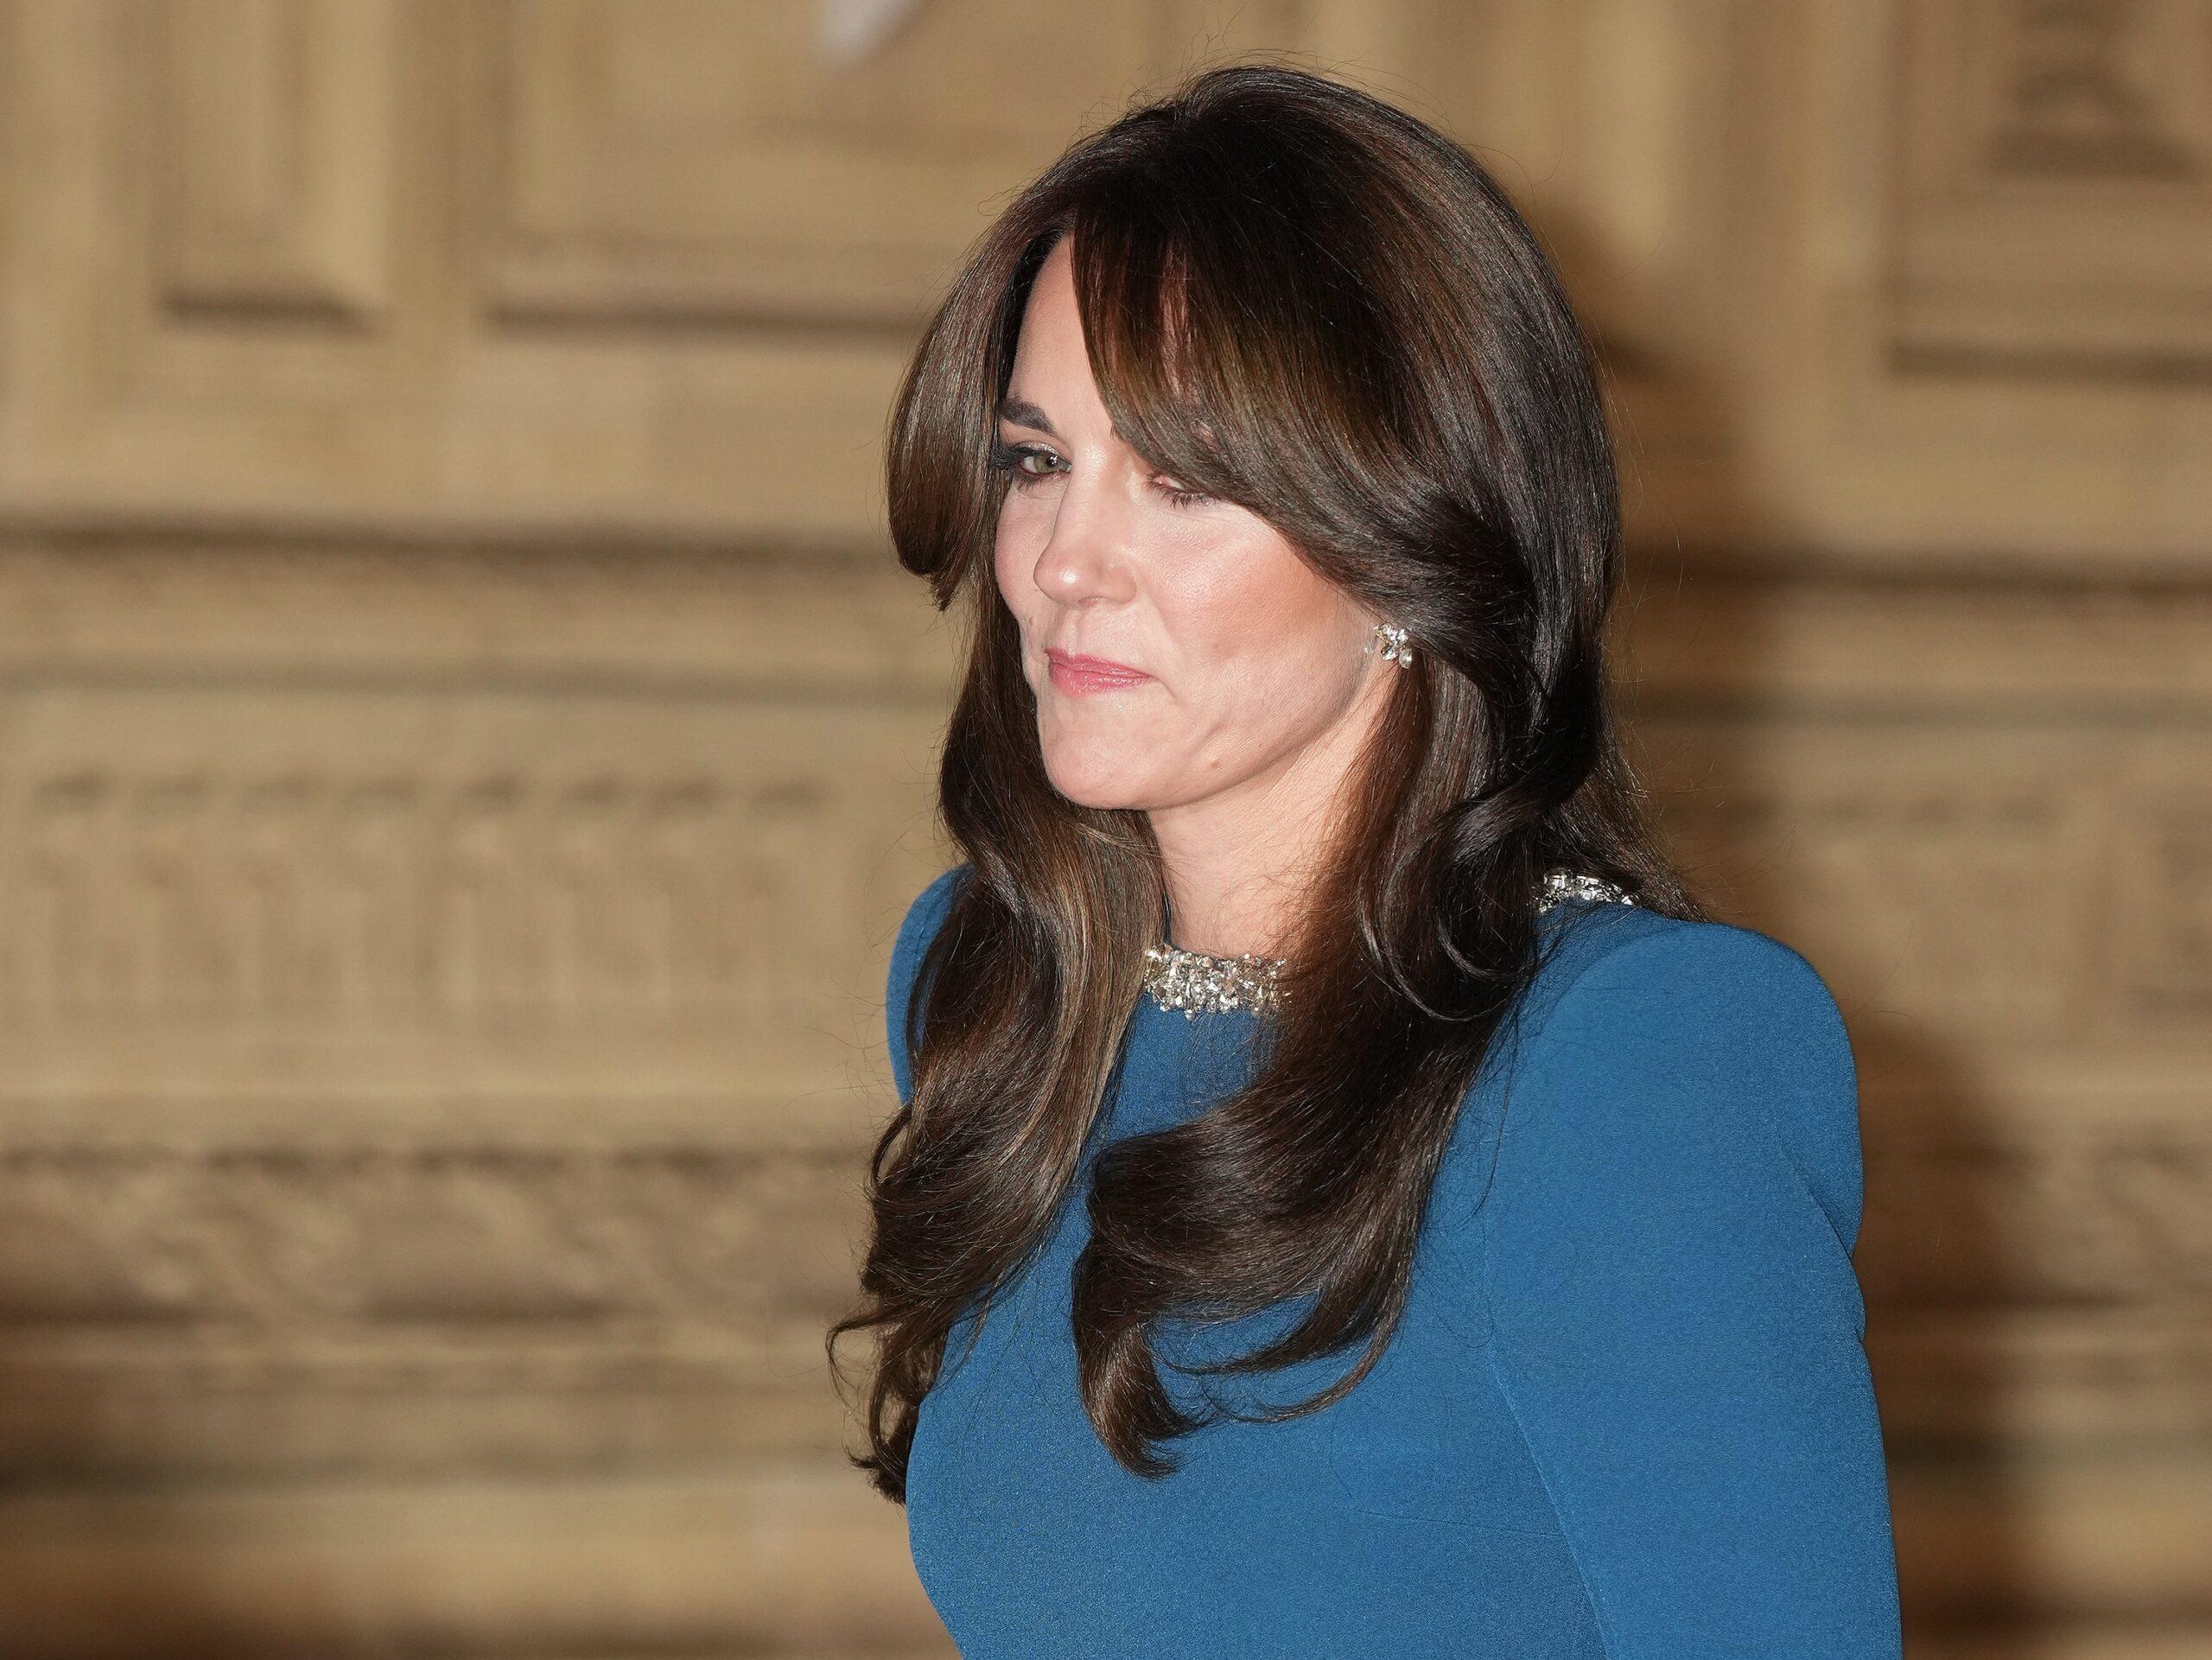 Kate Middleton Once Donated Her Hair To Child Cancer Patients To Make Wigs